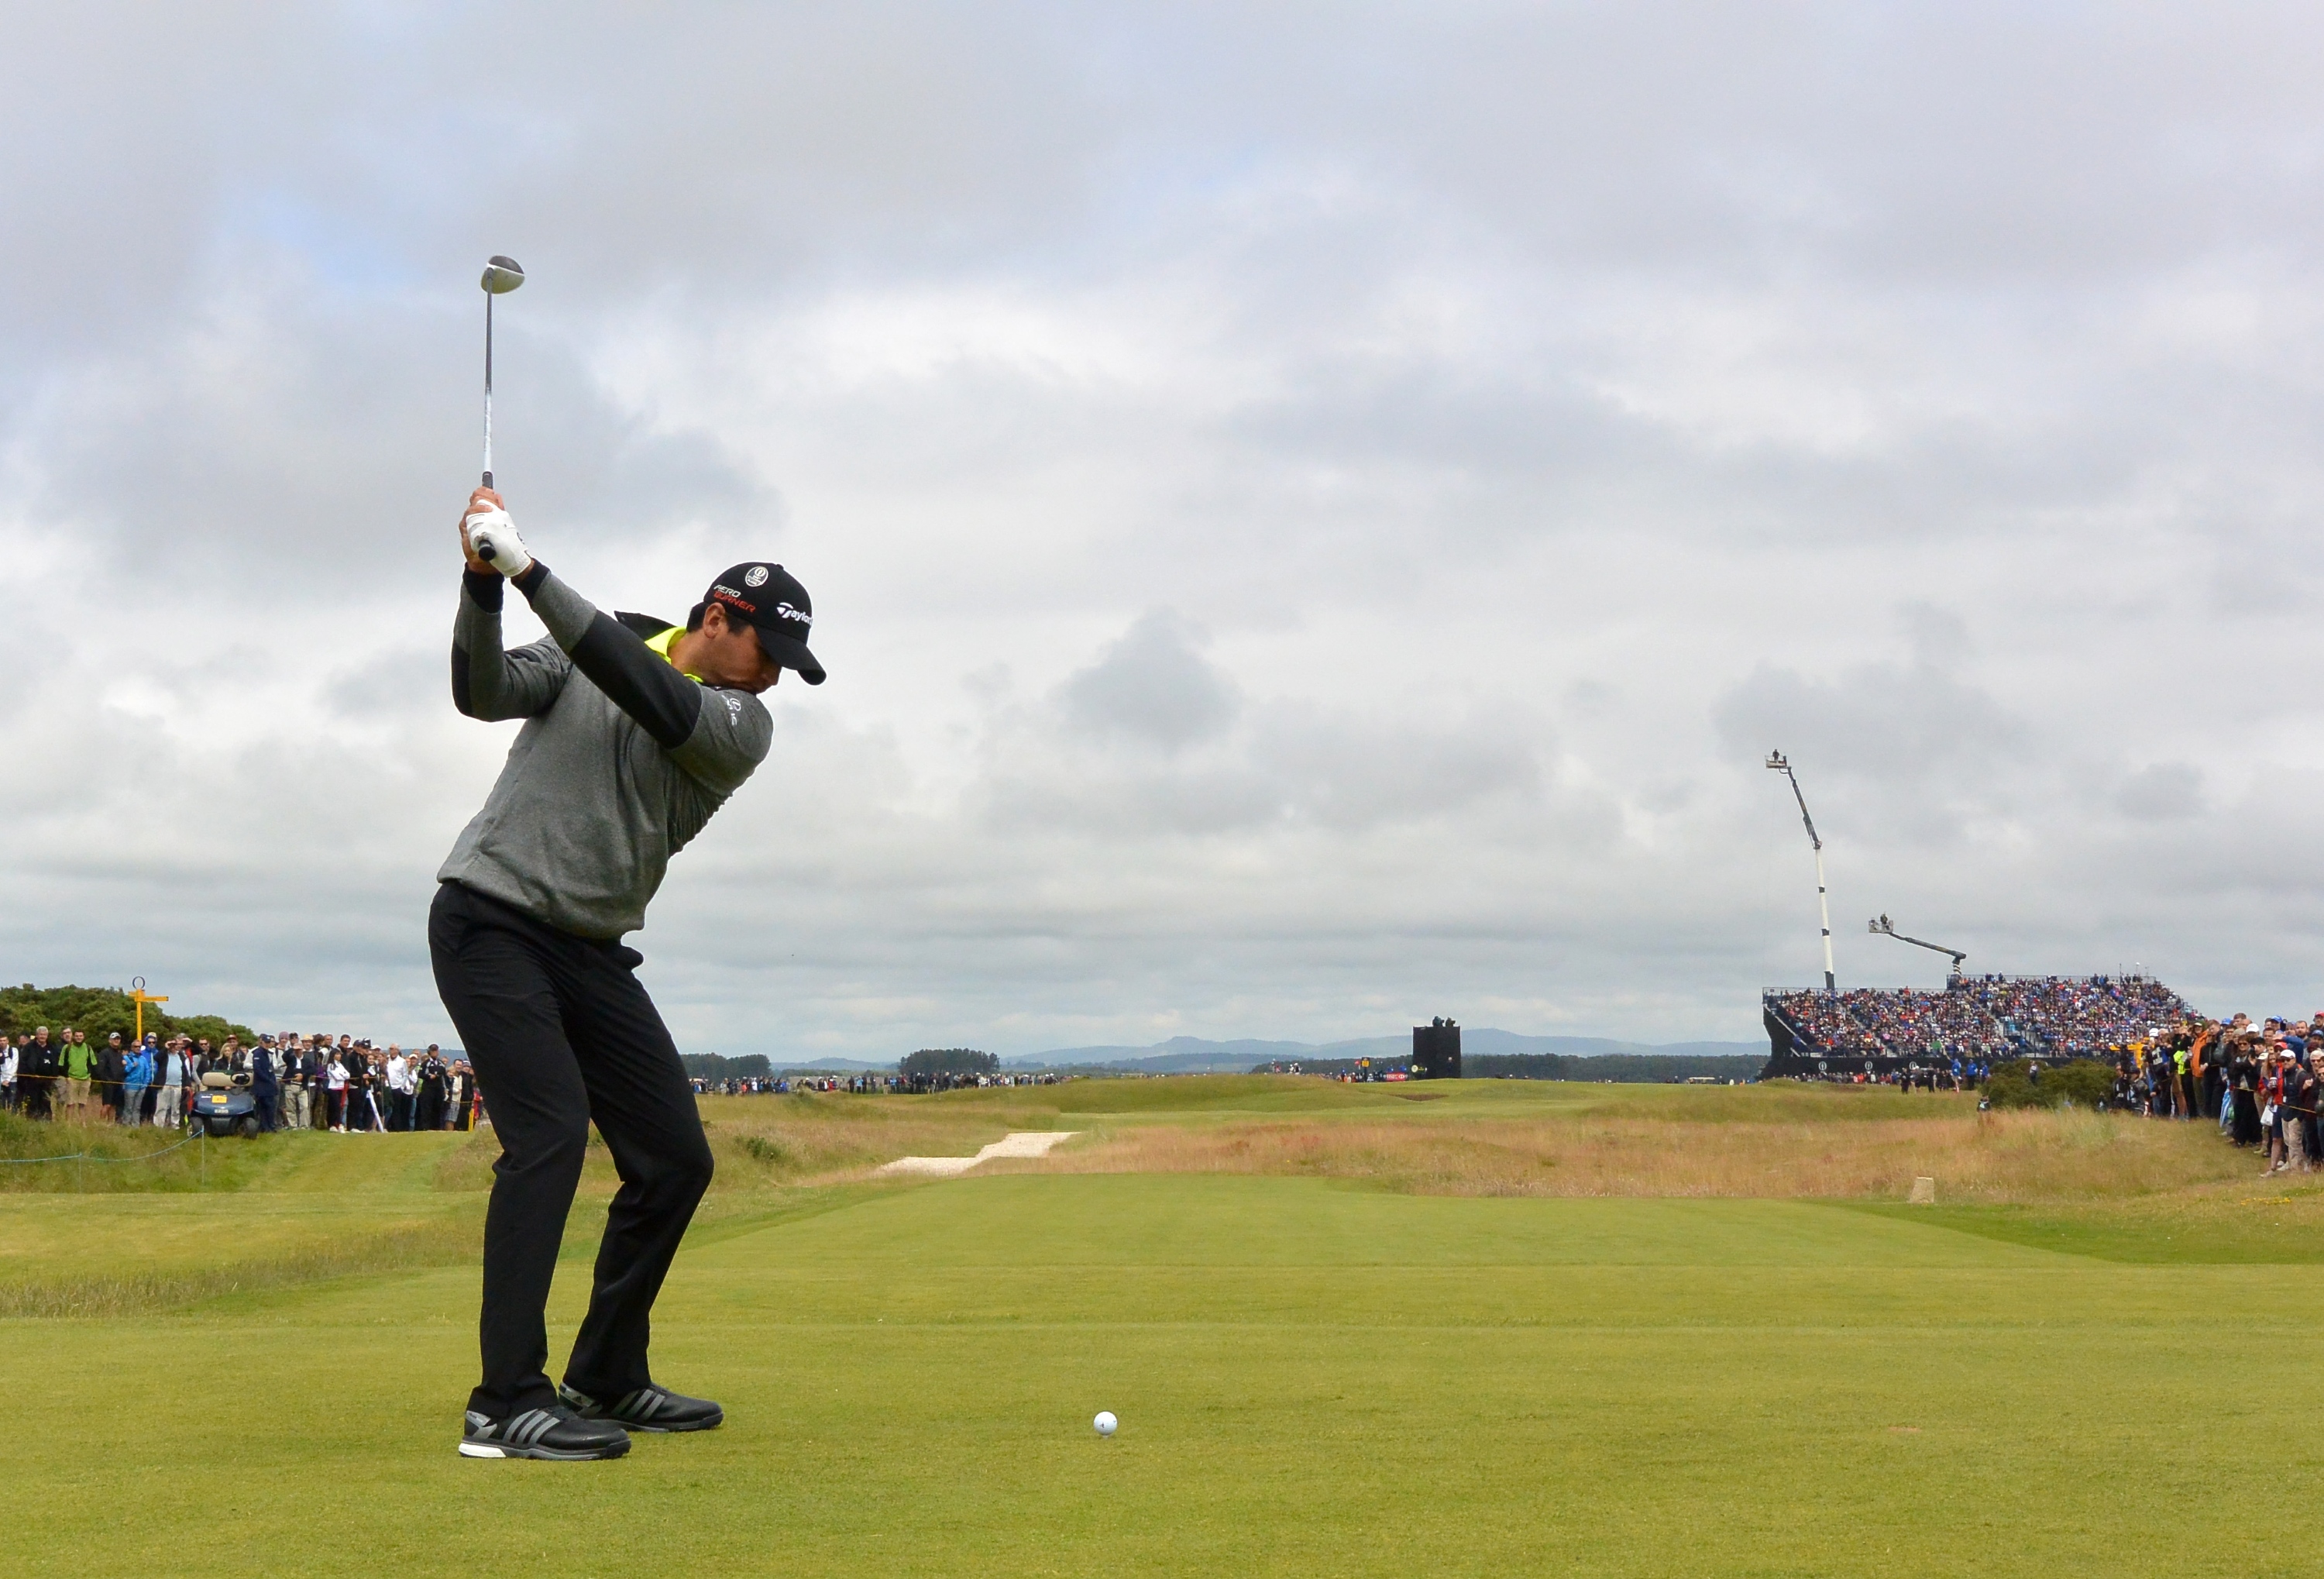 Jason Day tees off on the 7th hole during the first round of the 144th Open Championship. (Getty Images)